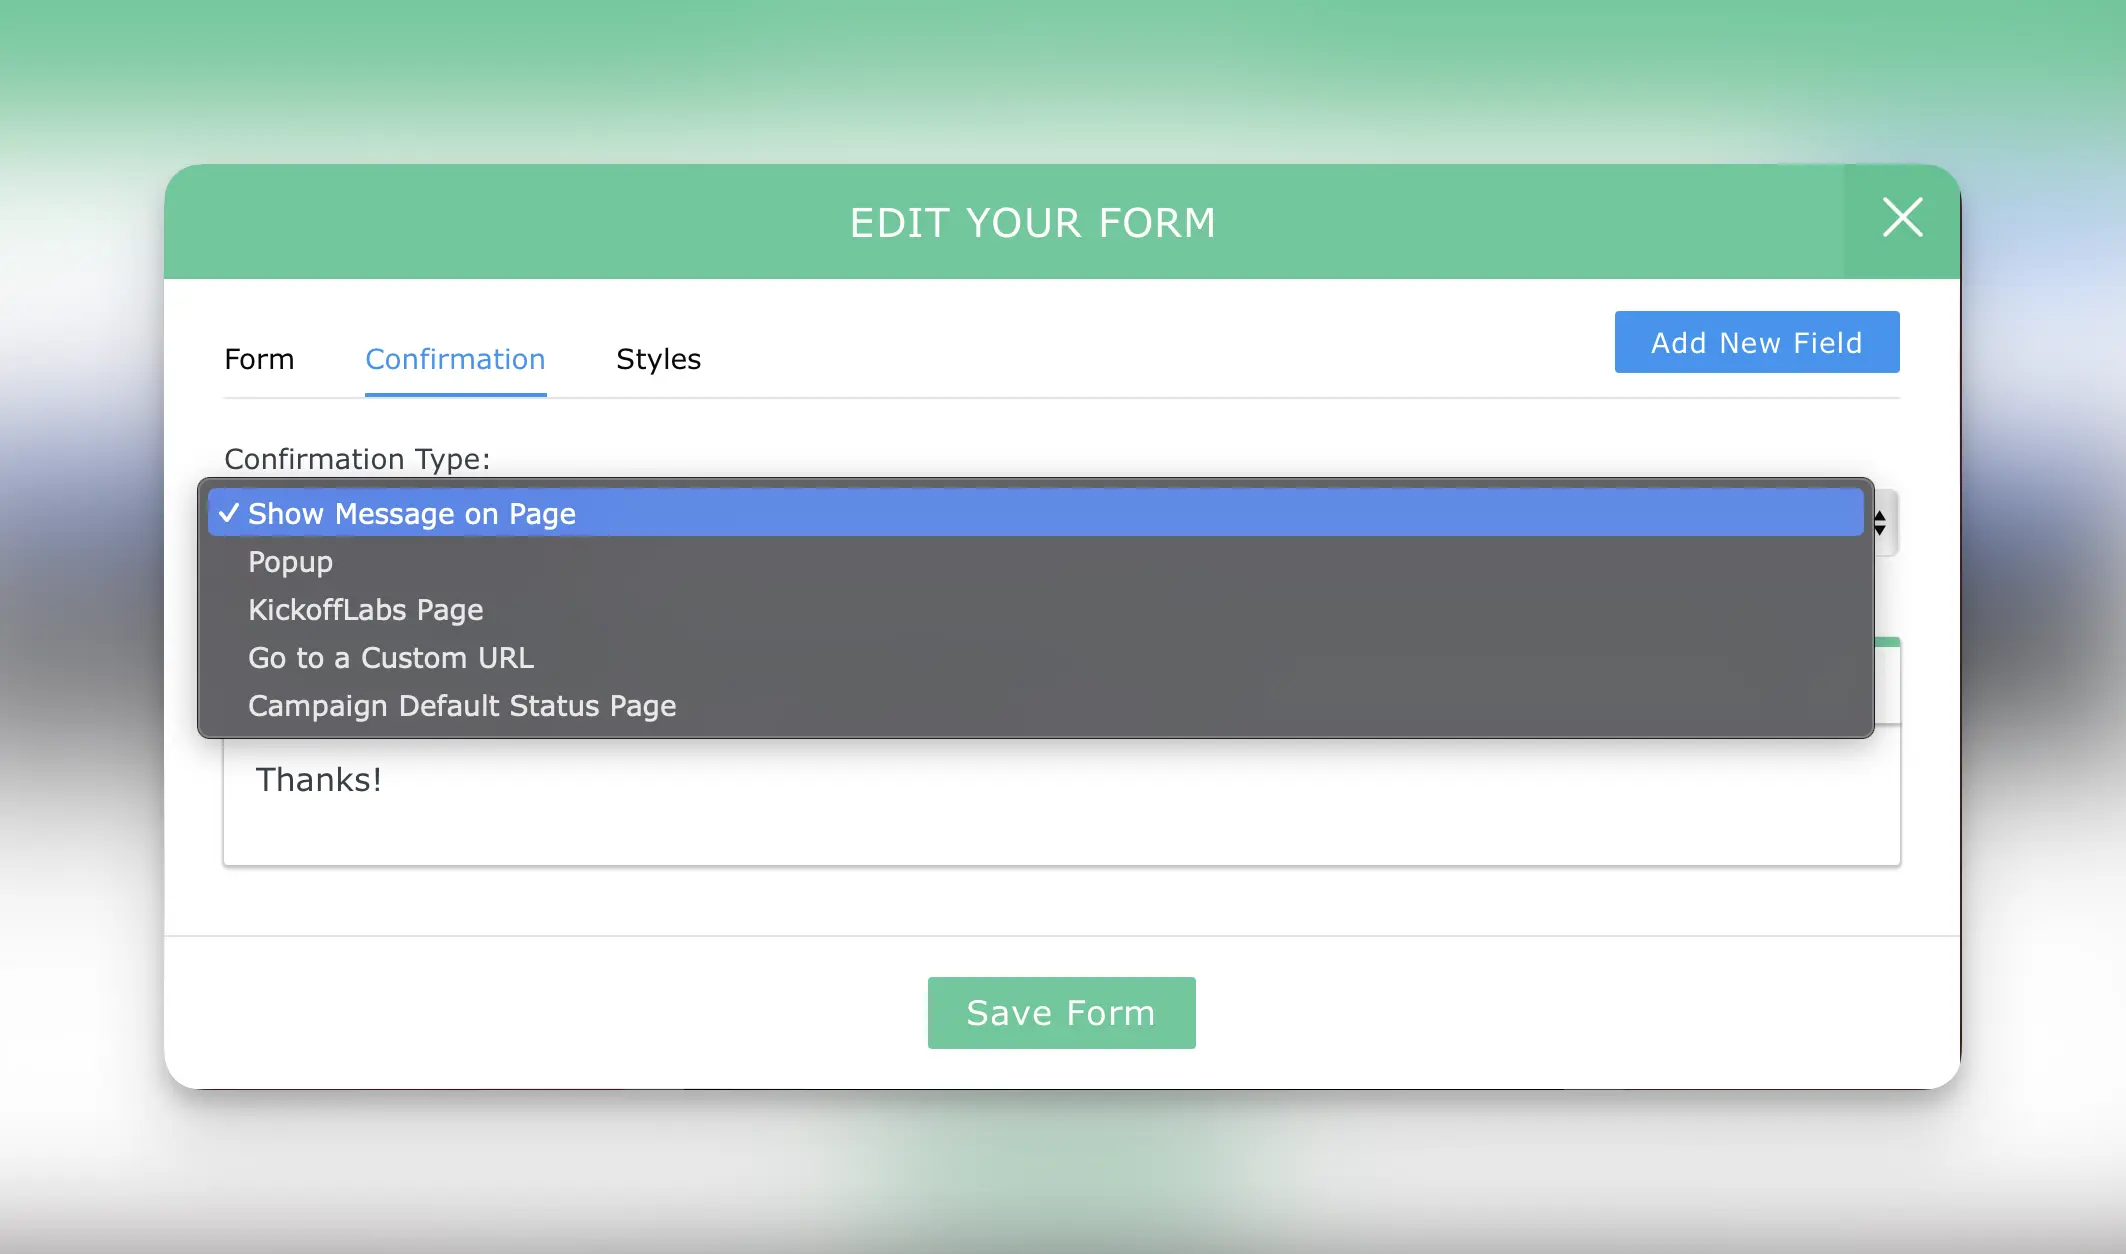 KickoffLabs form confirmation options.